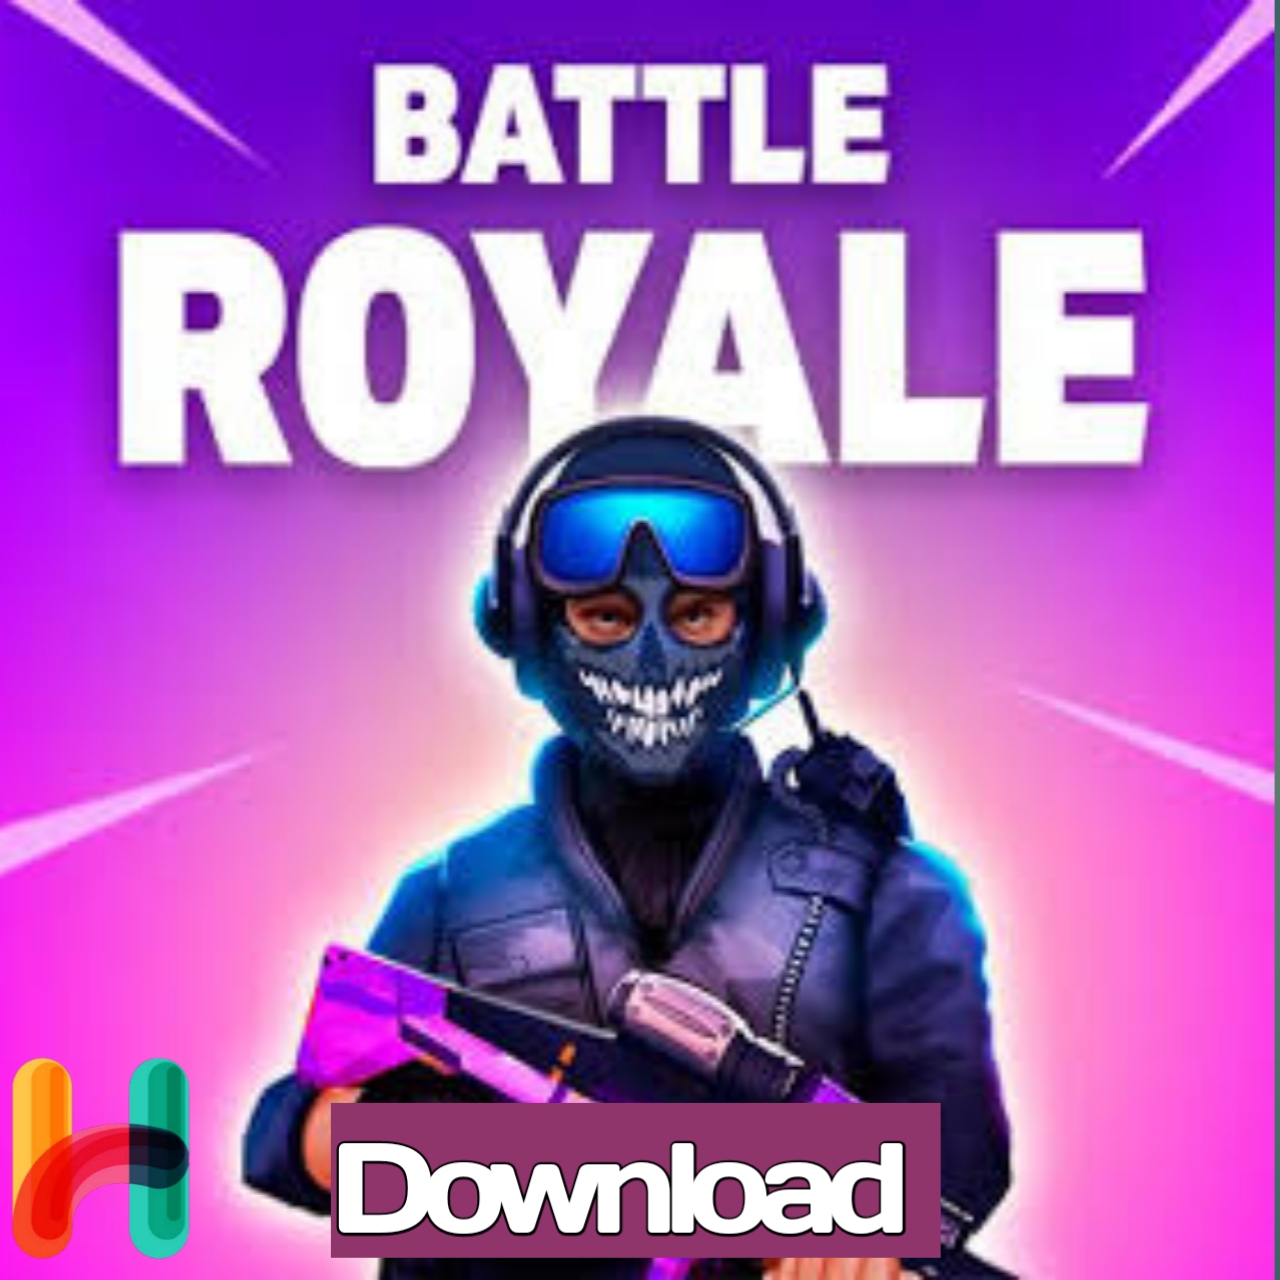 Spotify: Music and PodcastsDownload Battle Royale FPS Shooter MOD APK 1.12.02 Mega Mod with direct link, good speed and without virus!